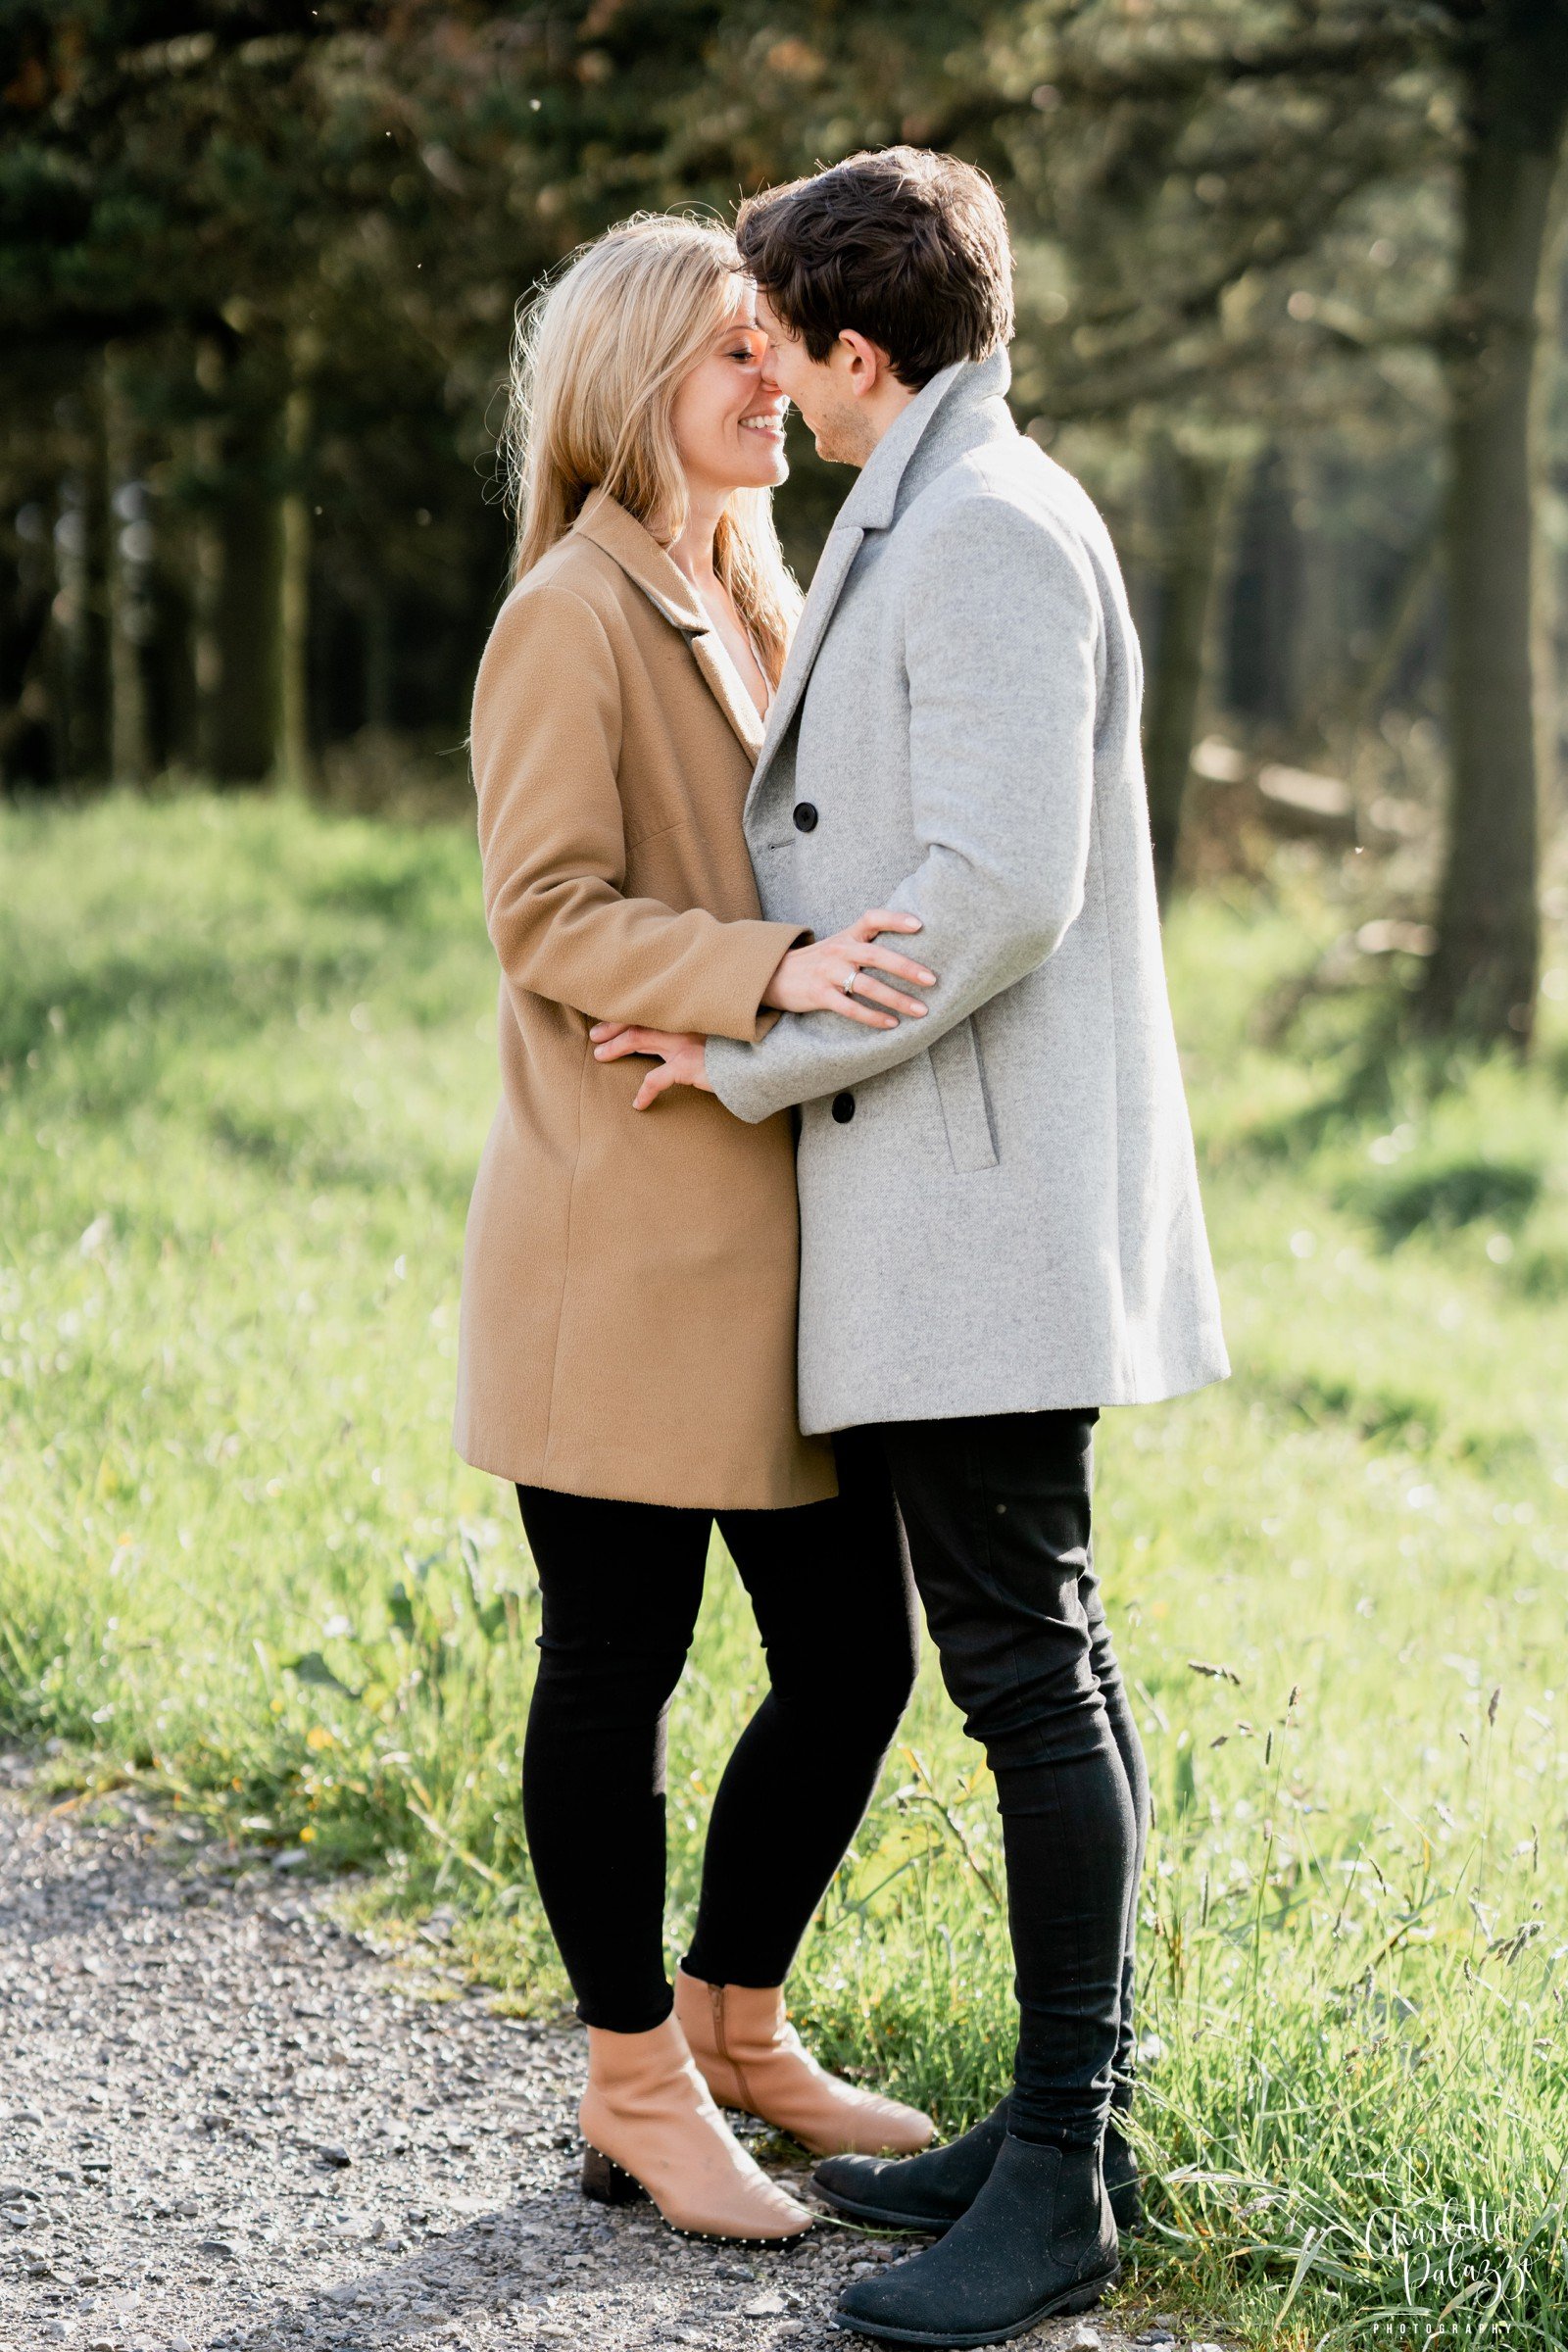 Holly_James_Engagement_session_Macclesfield_Forest_Cheshire_Wedding_Photographer_0022.jpg